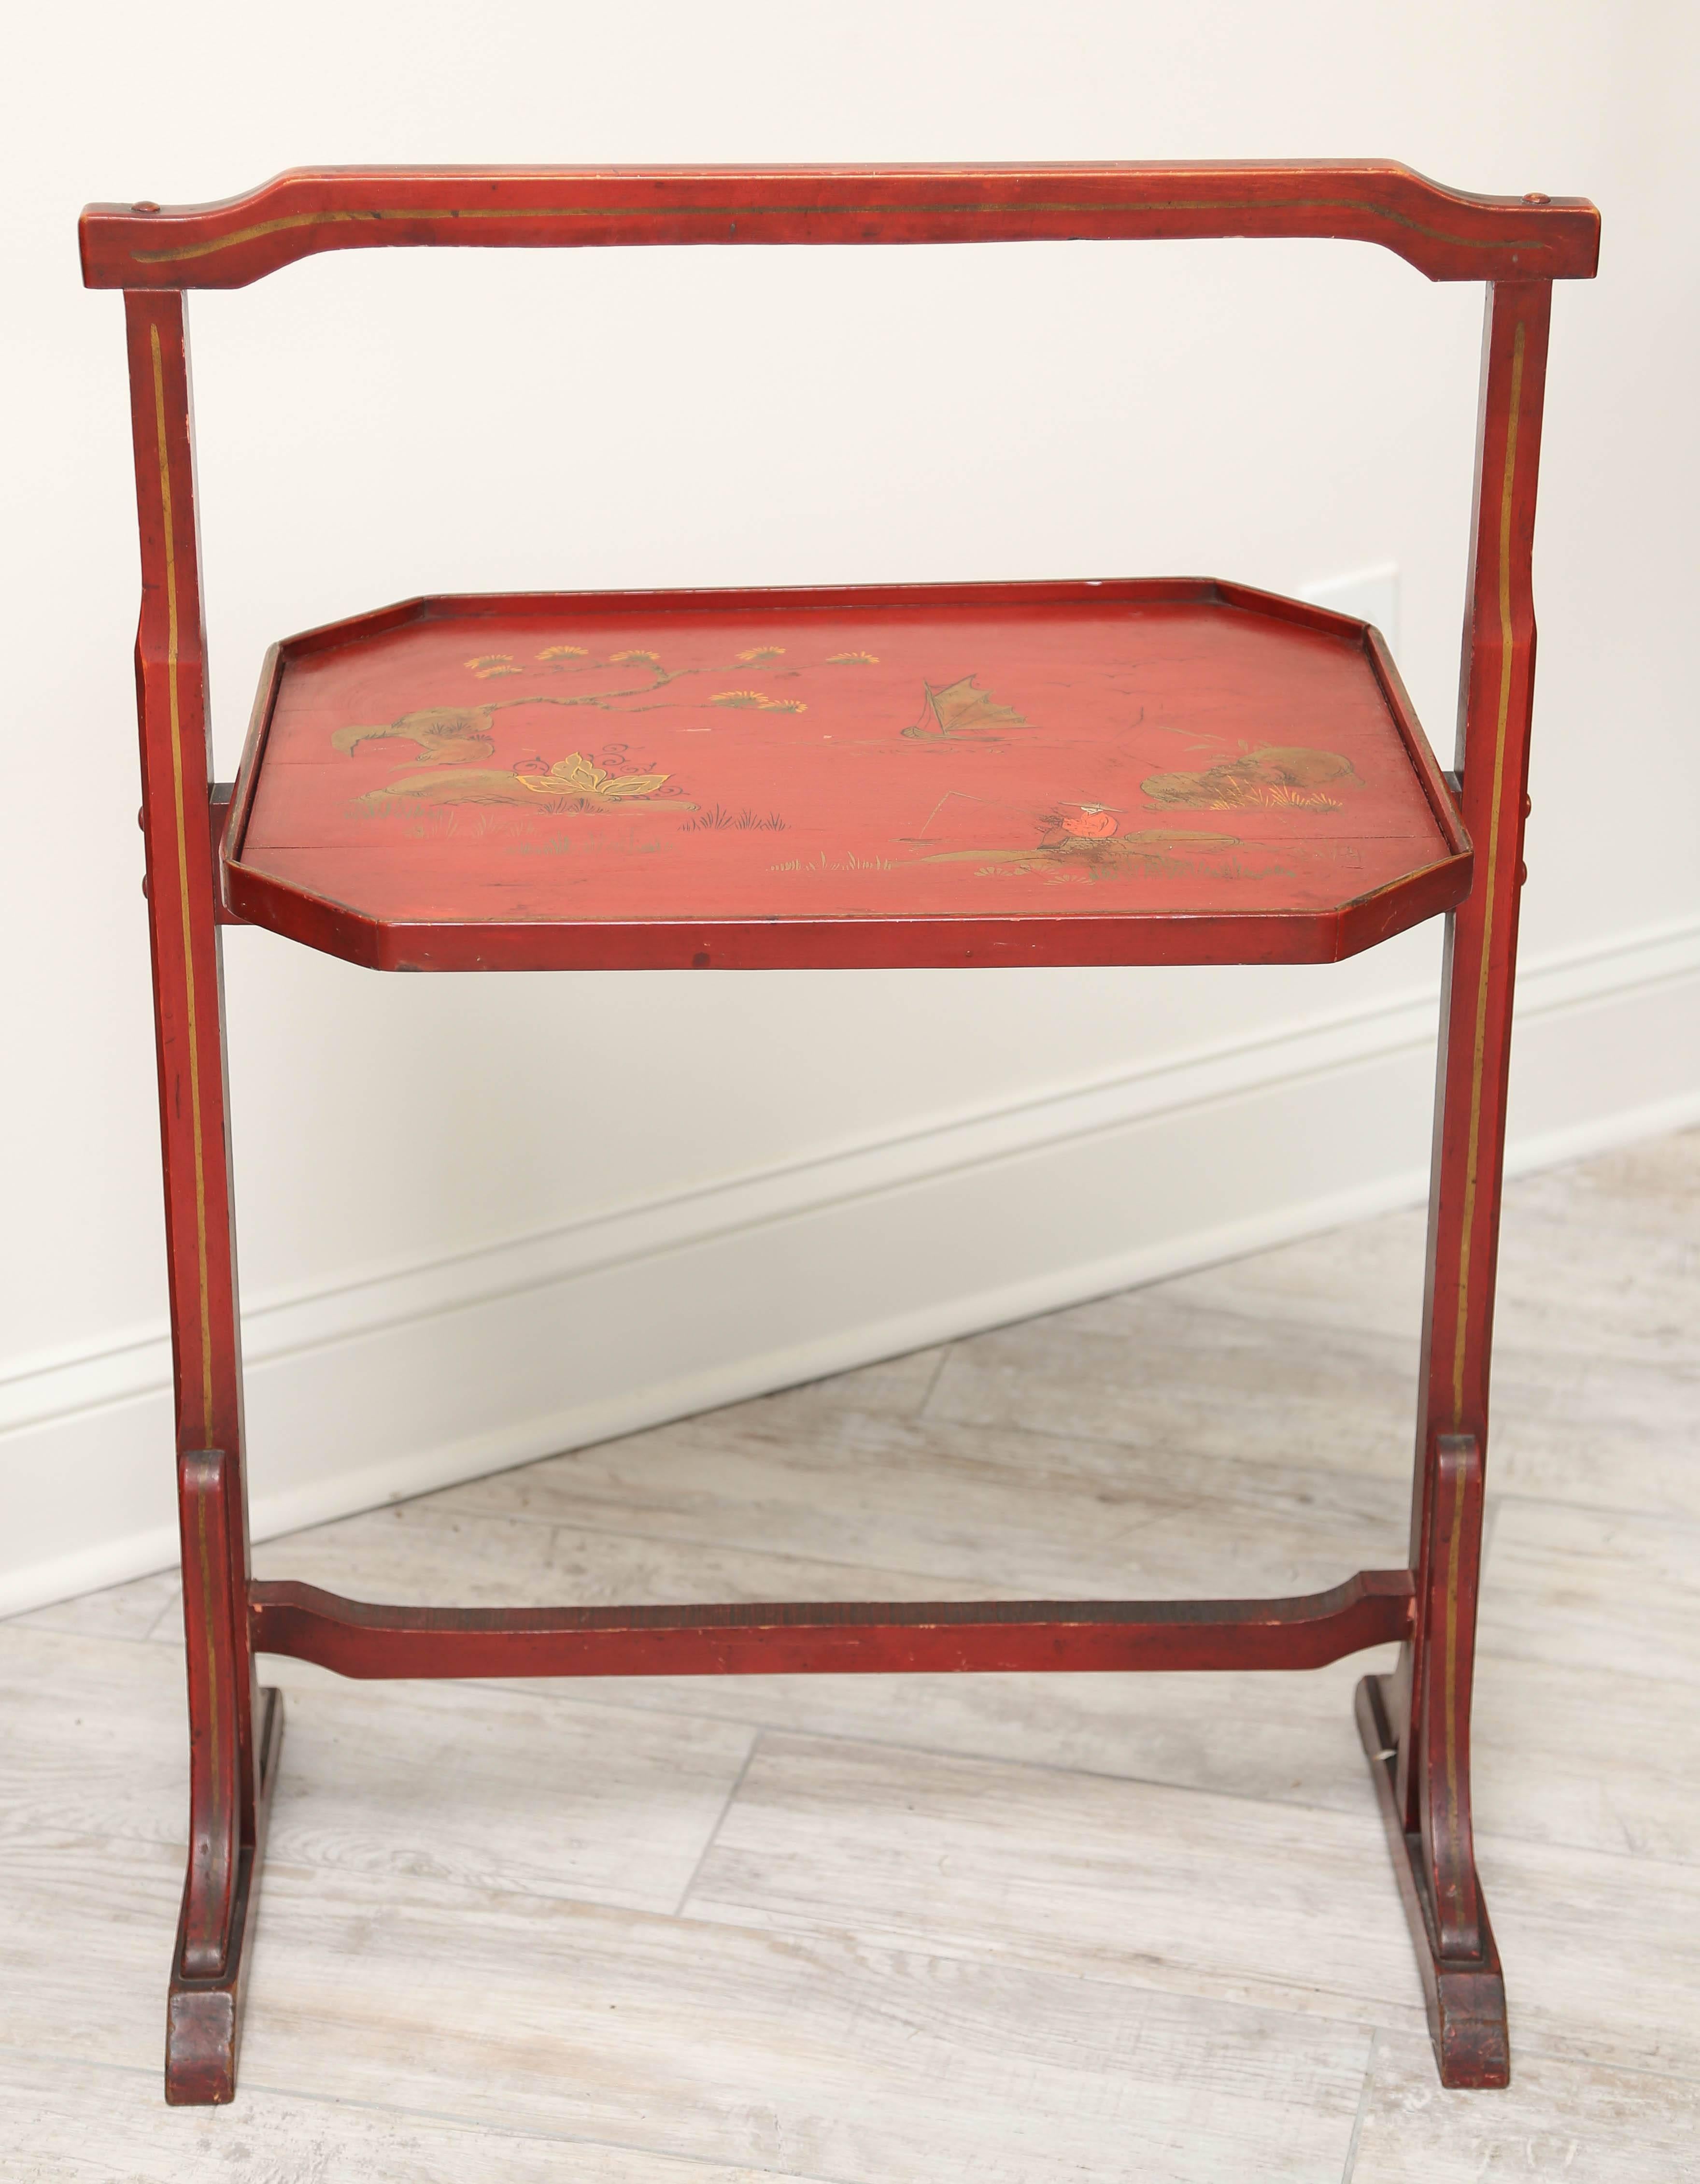 Charming oriental style folding tea tray table finished in a lovely Chinese red.